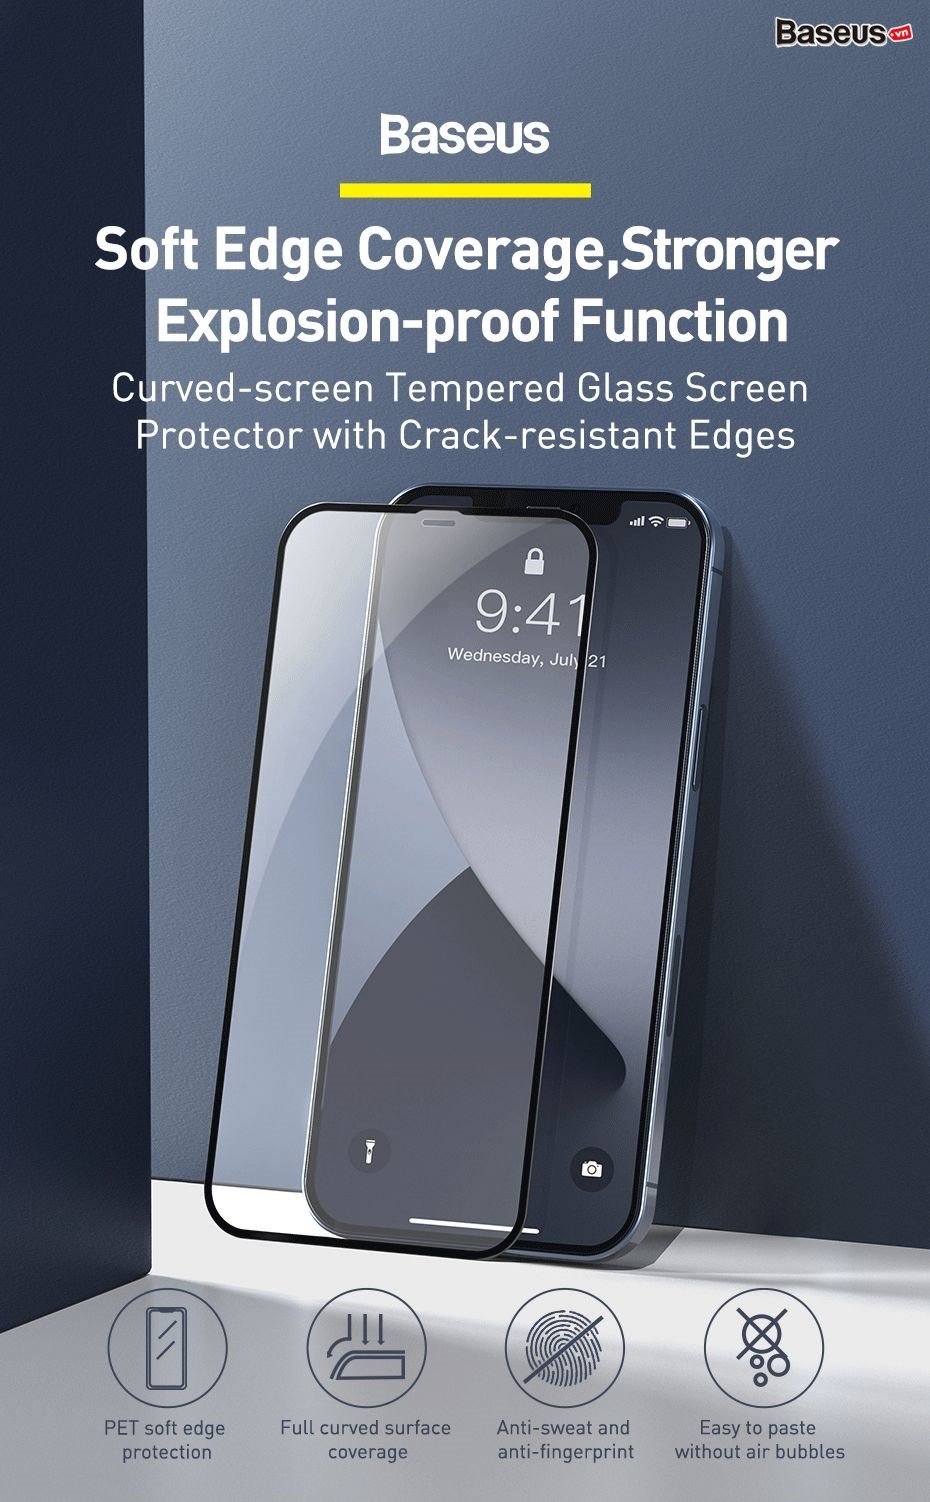 0.23mm_crack-resistant_edges_ip_2020__01_7bcf5aa251d3490e9ced3bf5223be932.jpg